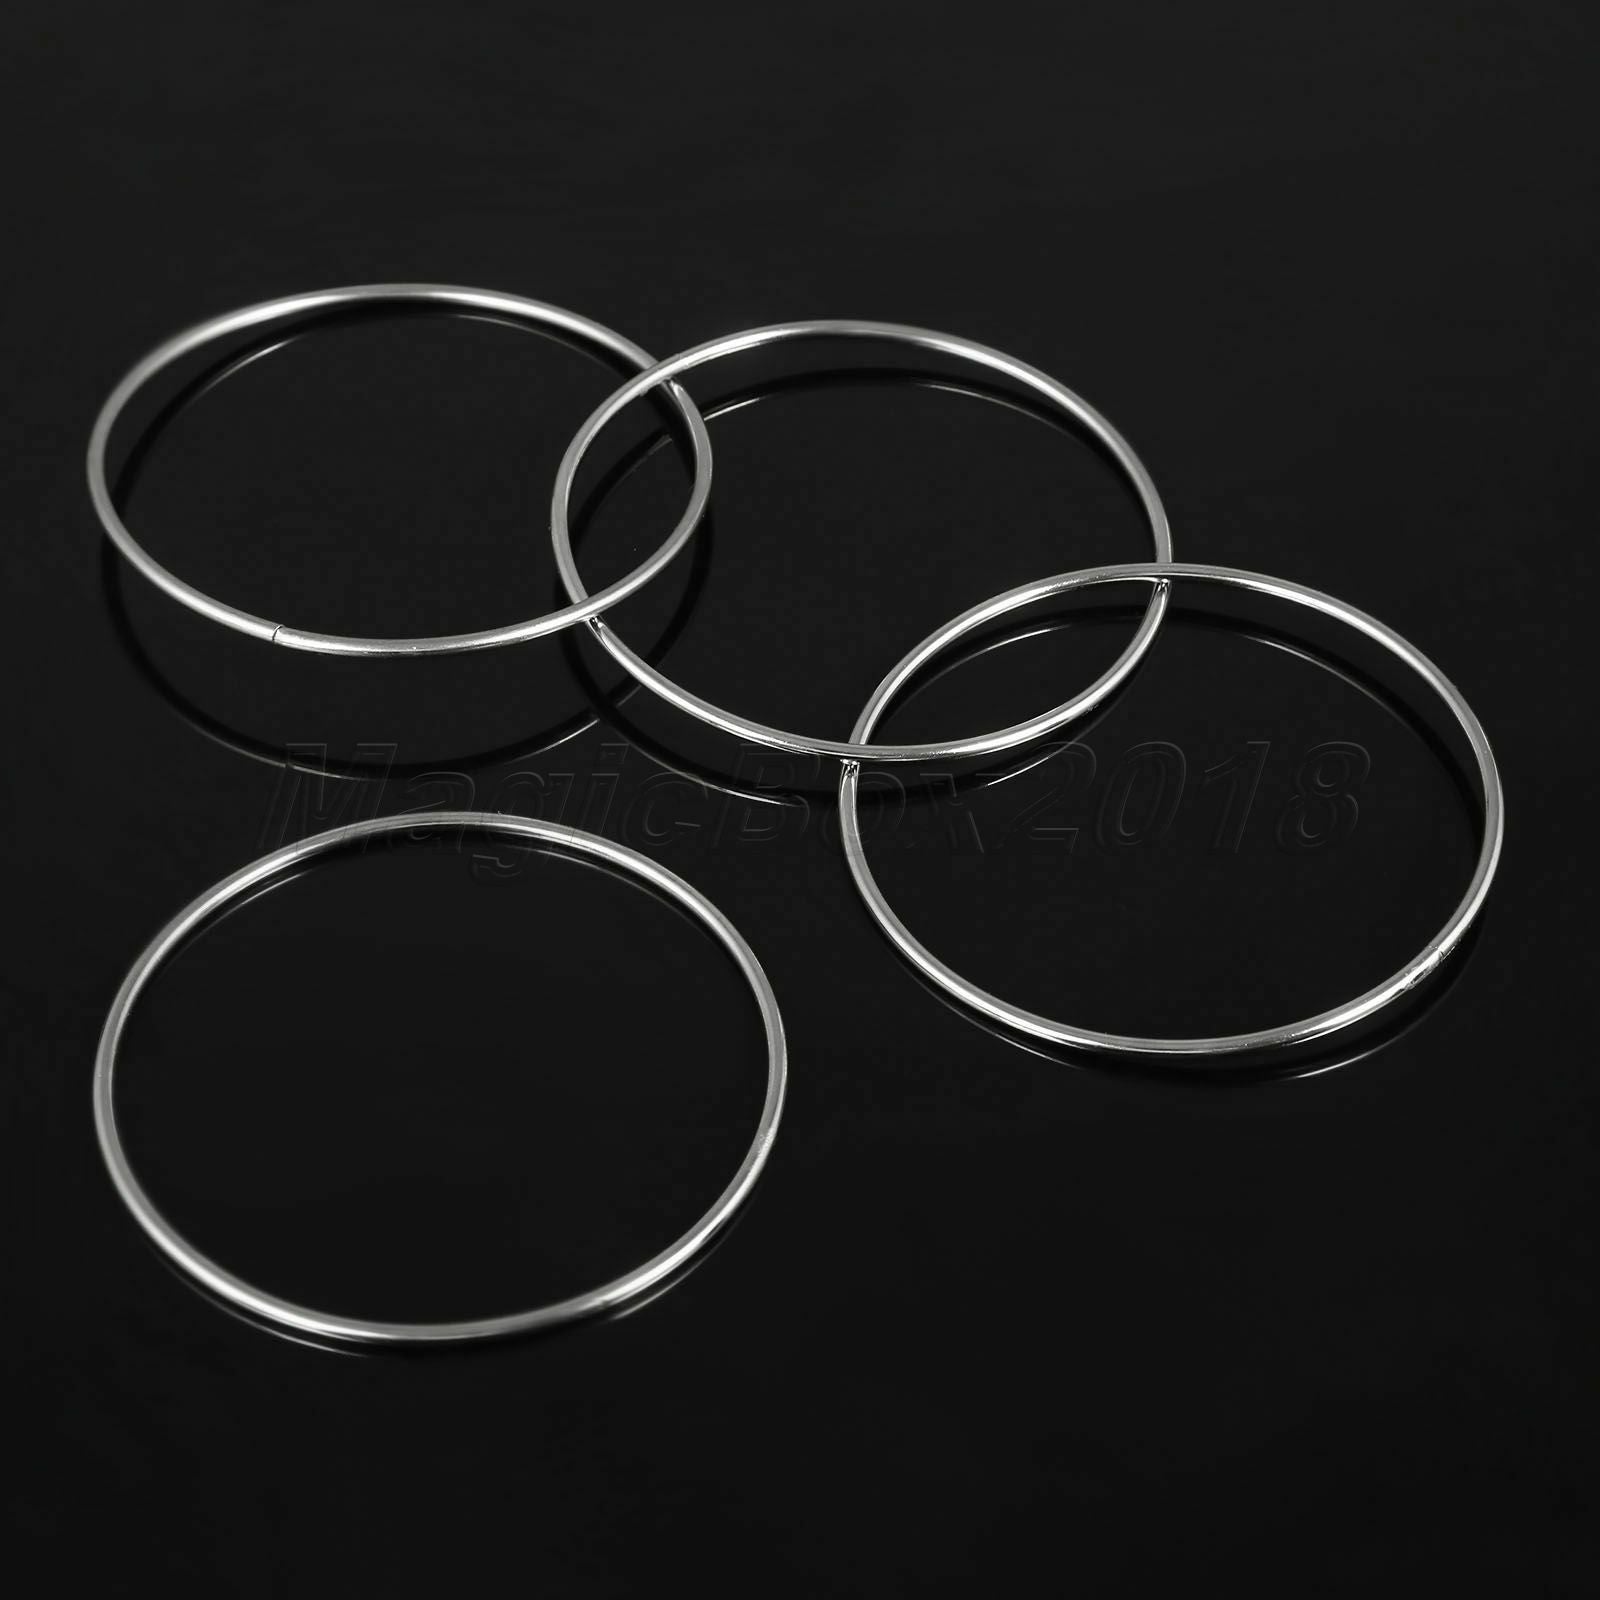 1set Chain Chinese Rings Close-Up Stage Magic Trick Props Classic Toys 10cm Dia.